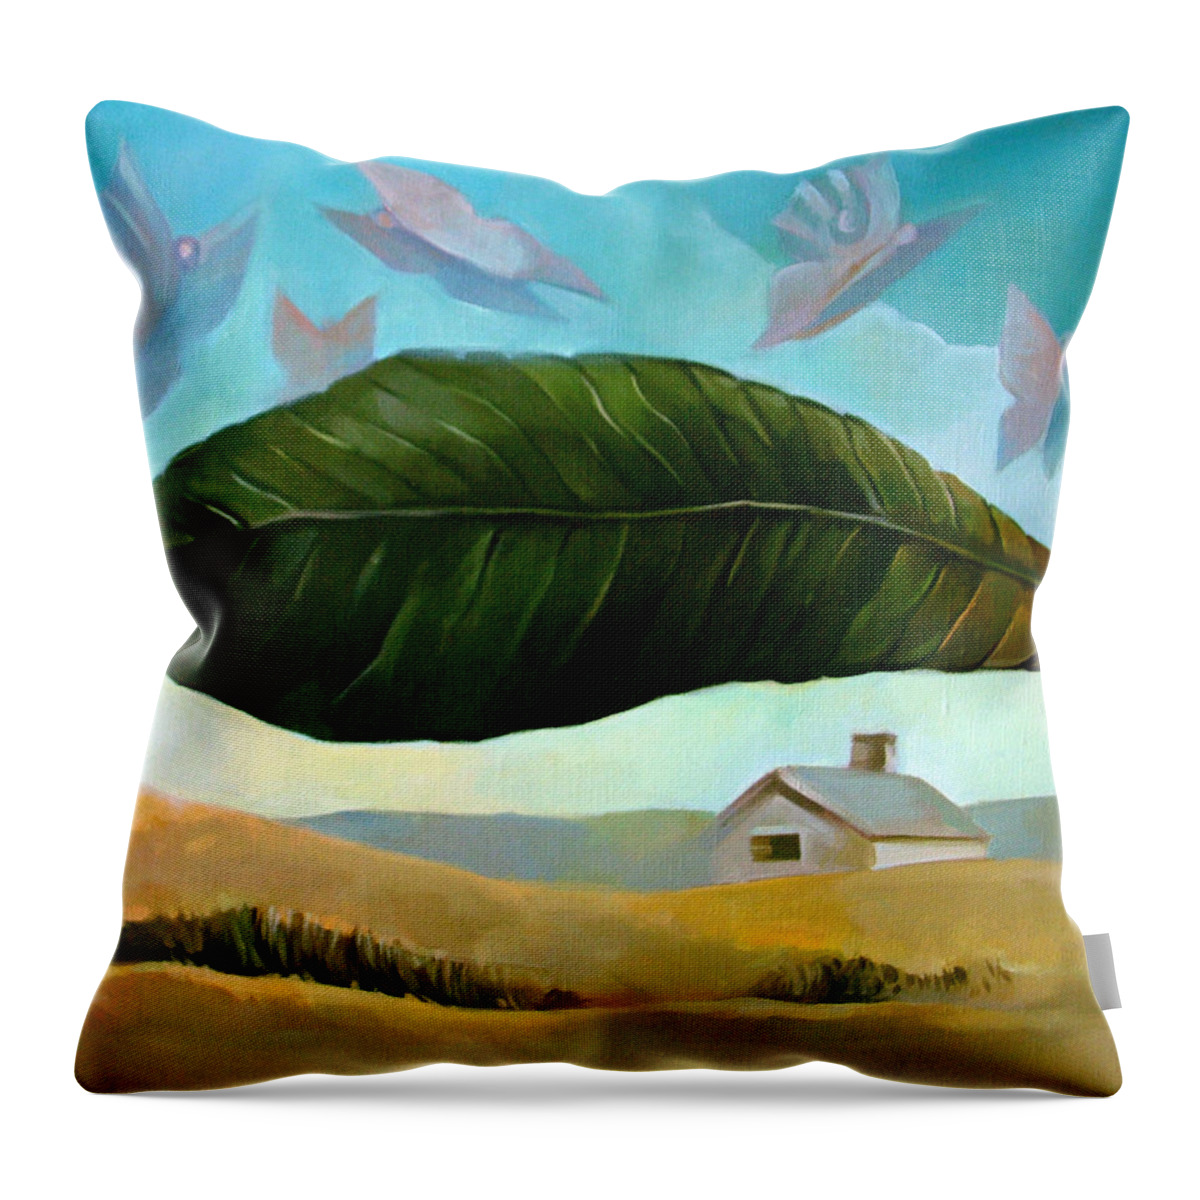 Green Throw Pillow featuring the painting Norman Leaf by Filip Mihail